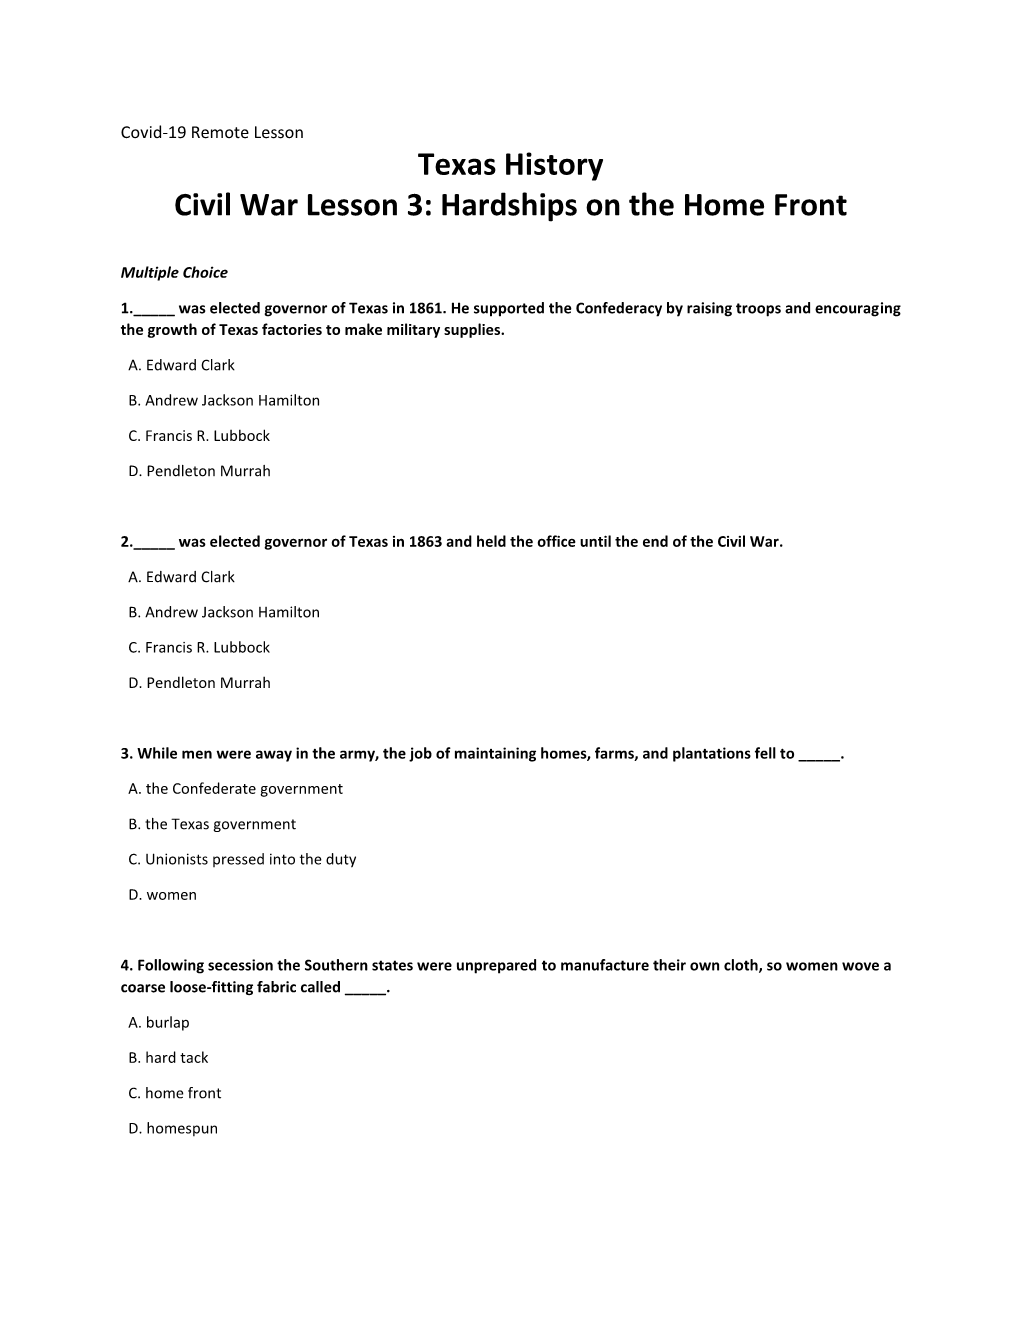 Texas History Civil War Lesson 3: Hardships on the Home Front